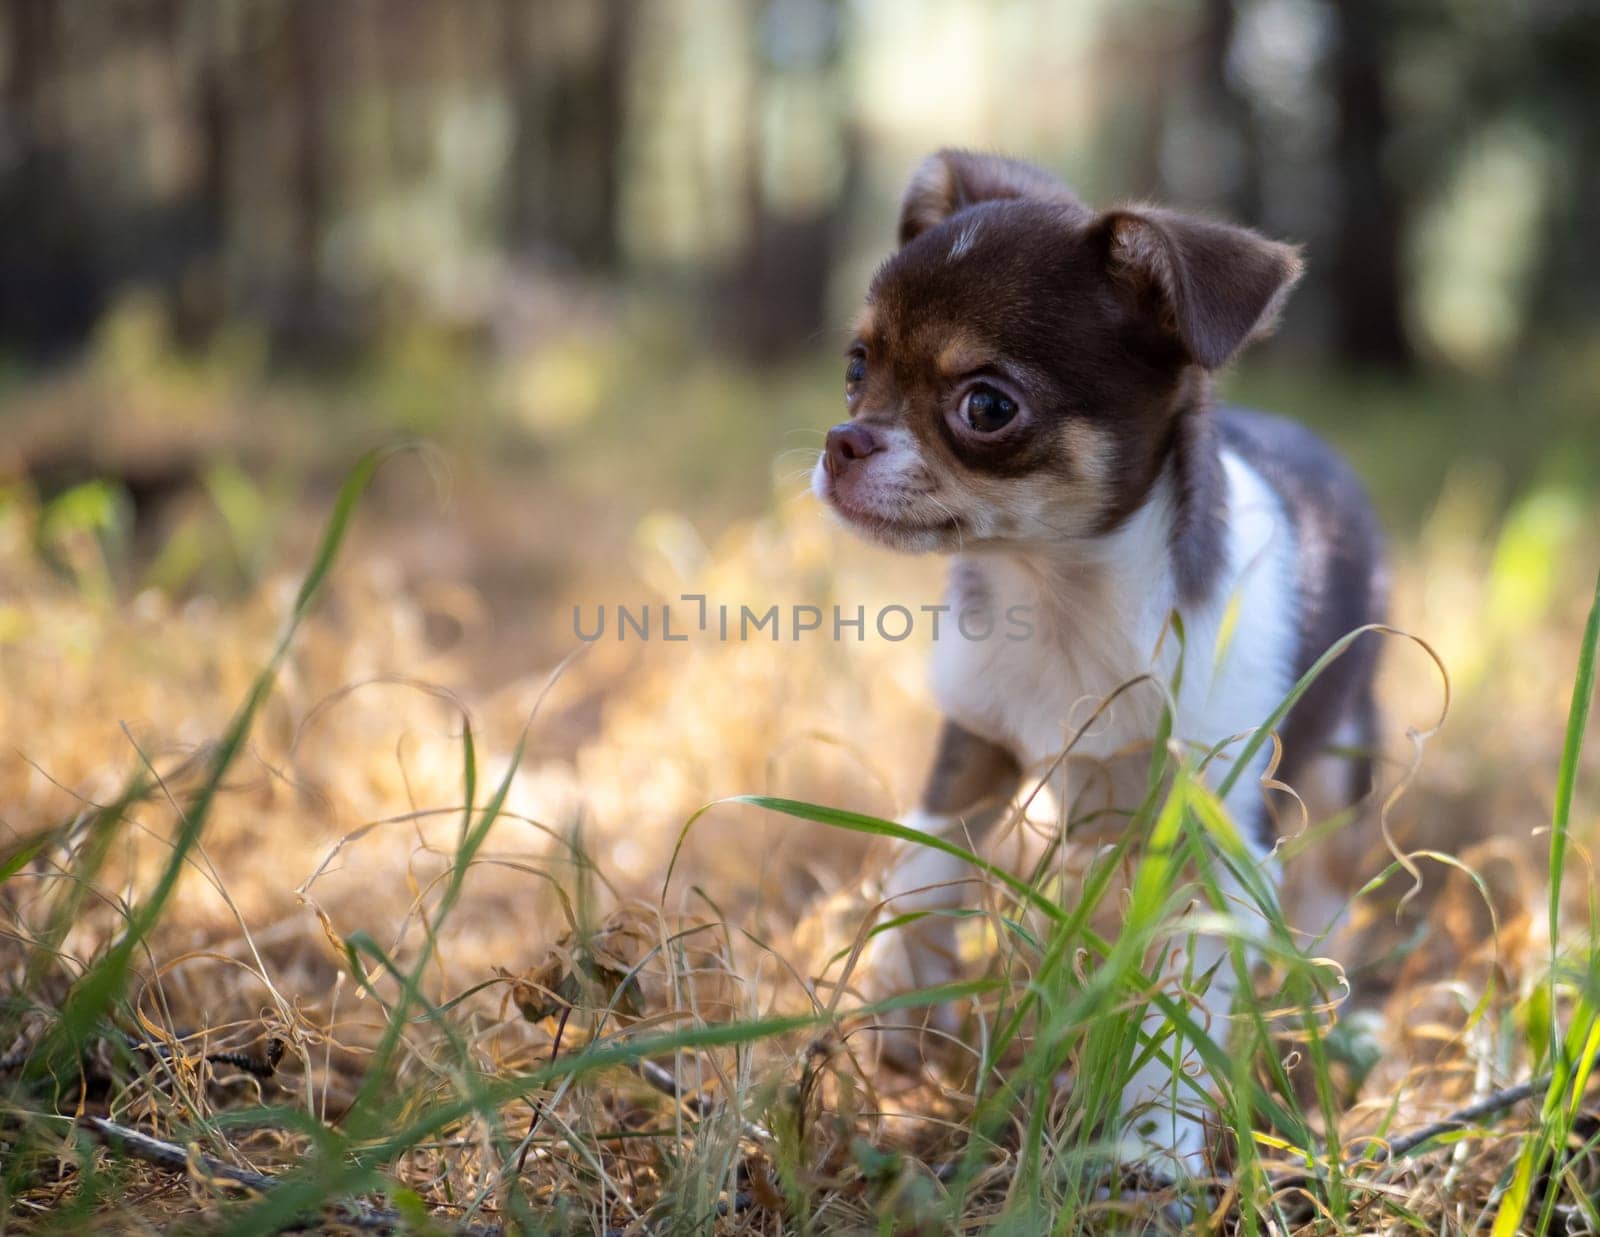 This evocative image captures a pensive Chihuahua puppy amidst golden autumn grass, gazing into the distance.